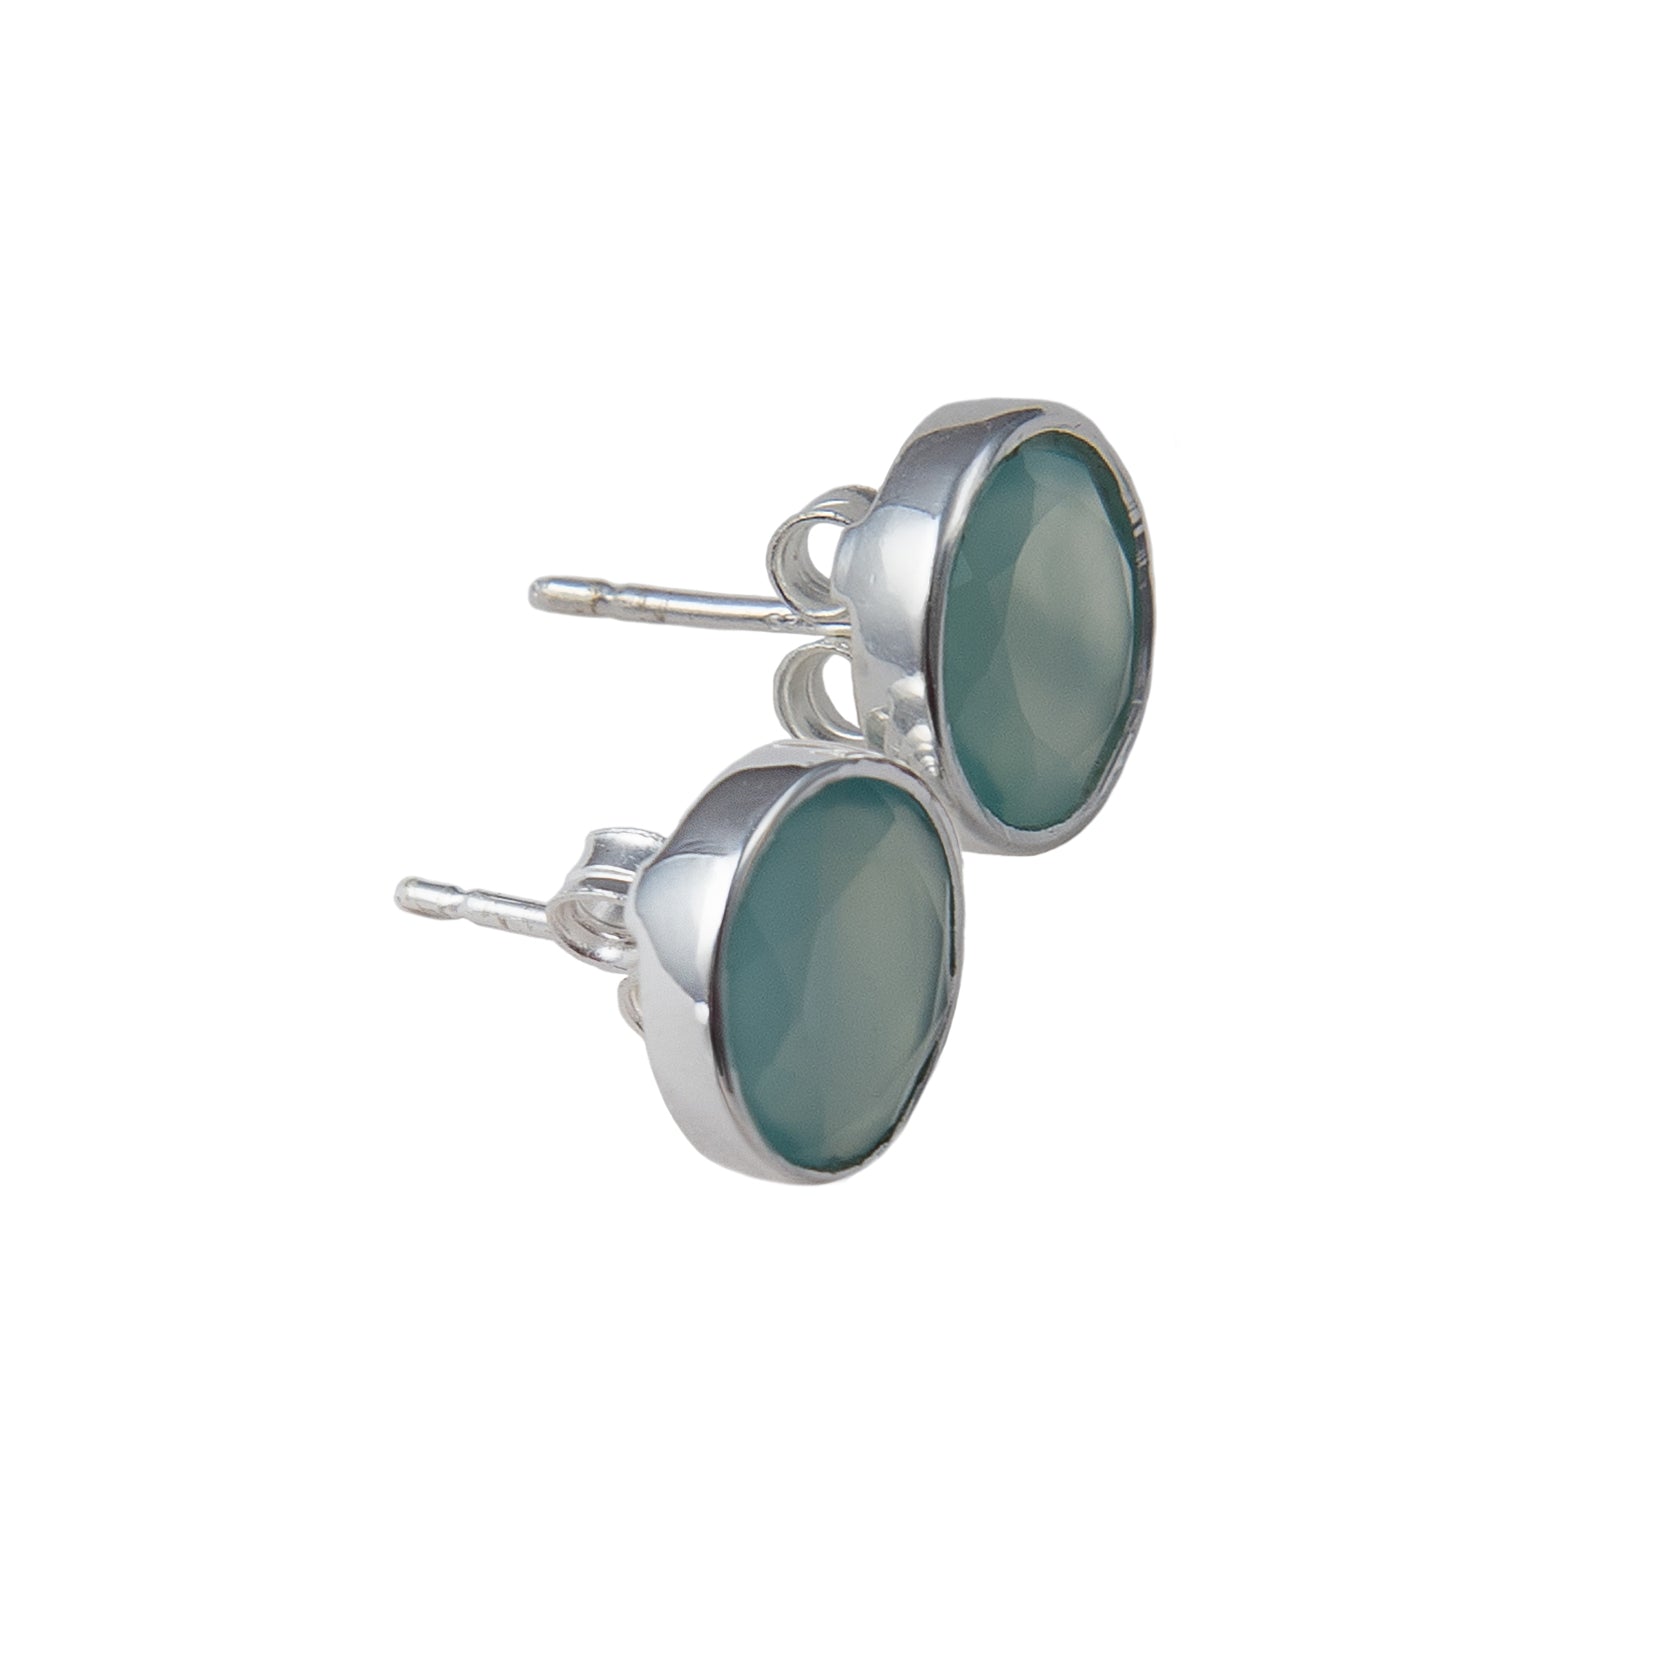 Aqua Chalcedony Studs in Sterling Silver with a Round Faceted Gemstone